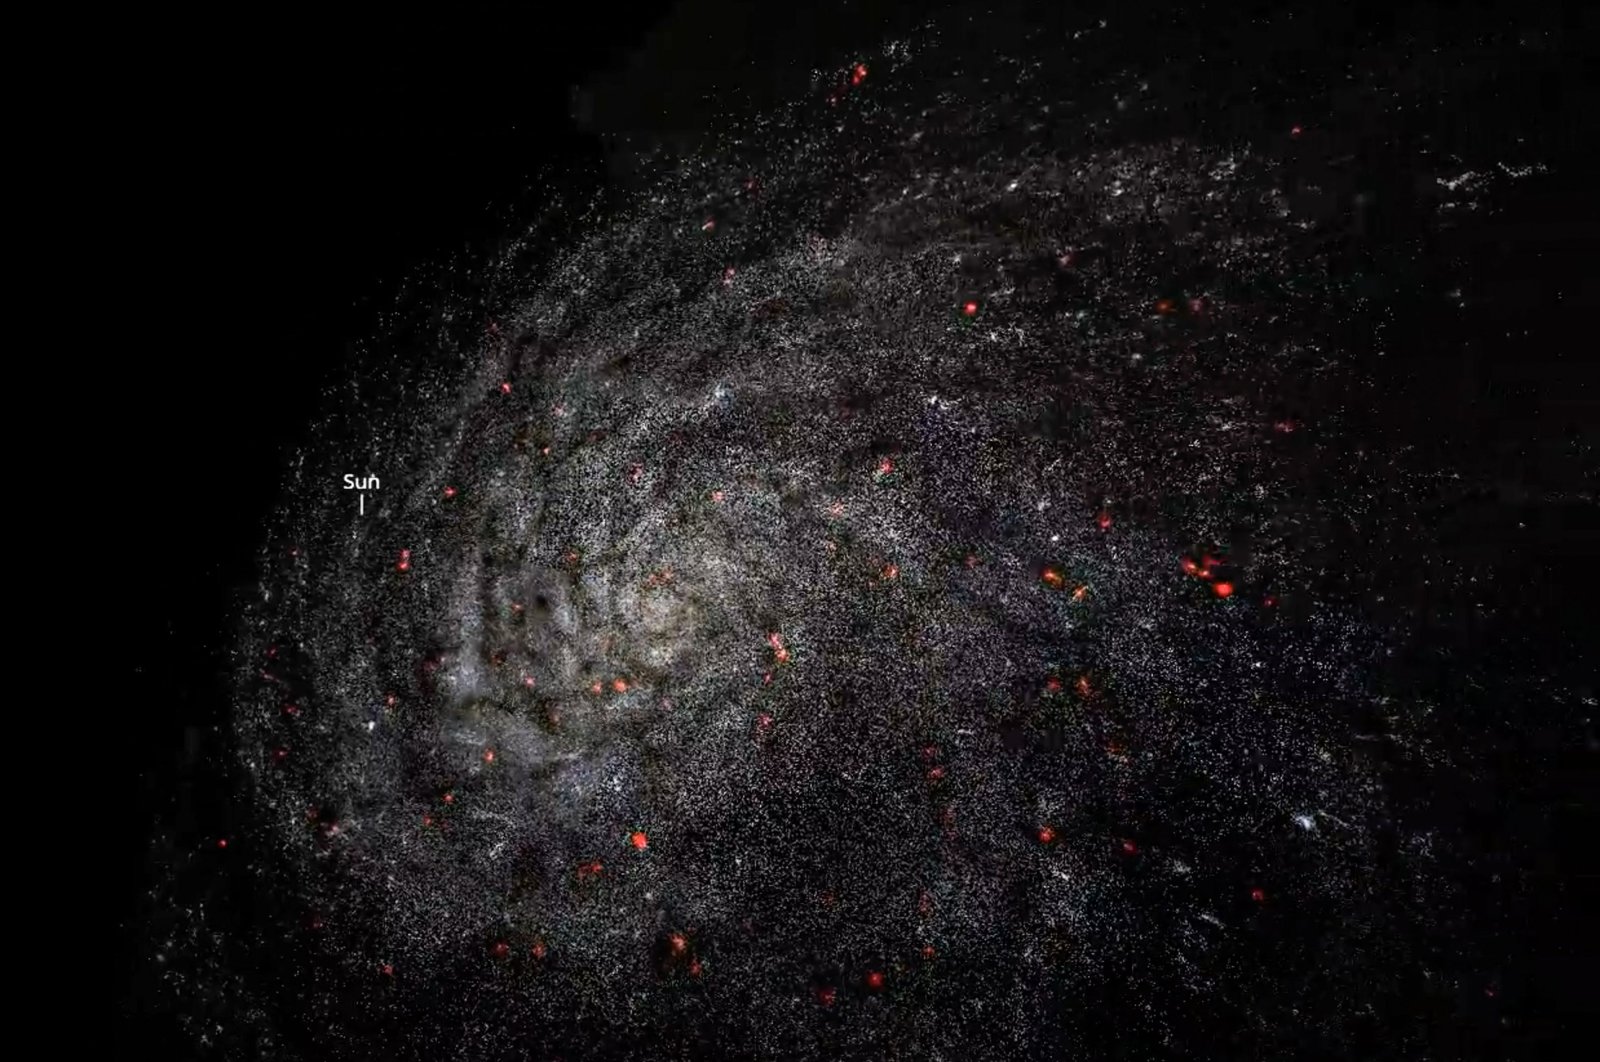 An image grab from a handout computer animation made available on July 19, 2020, by the Swiss Federal Institute of Technology Lausanne (EPFL) shows the Milky Way galaxy, with the location of the sun. (Photo by Handout / Swiss Federal Institute of Technology Lausanne / AFP)